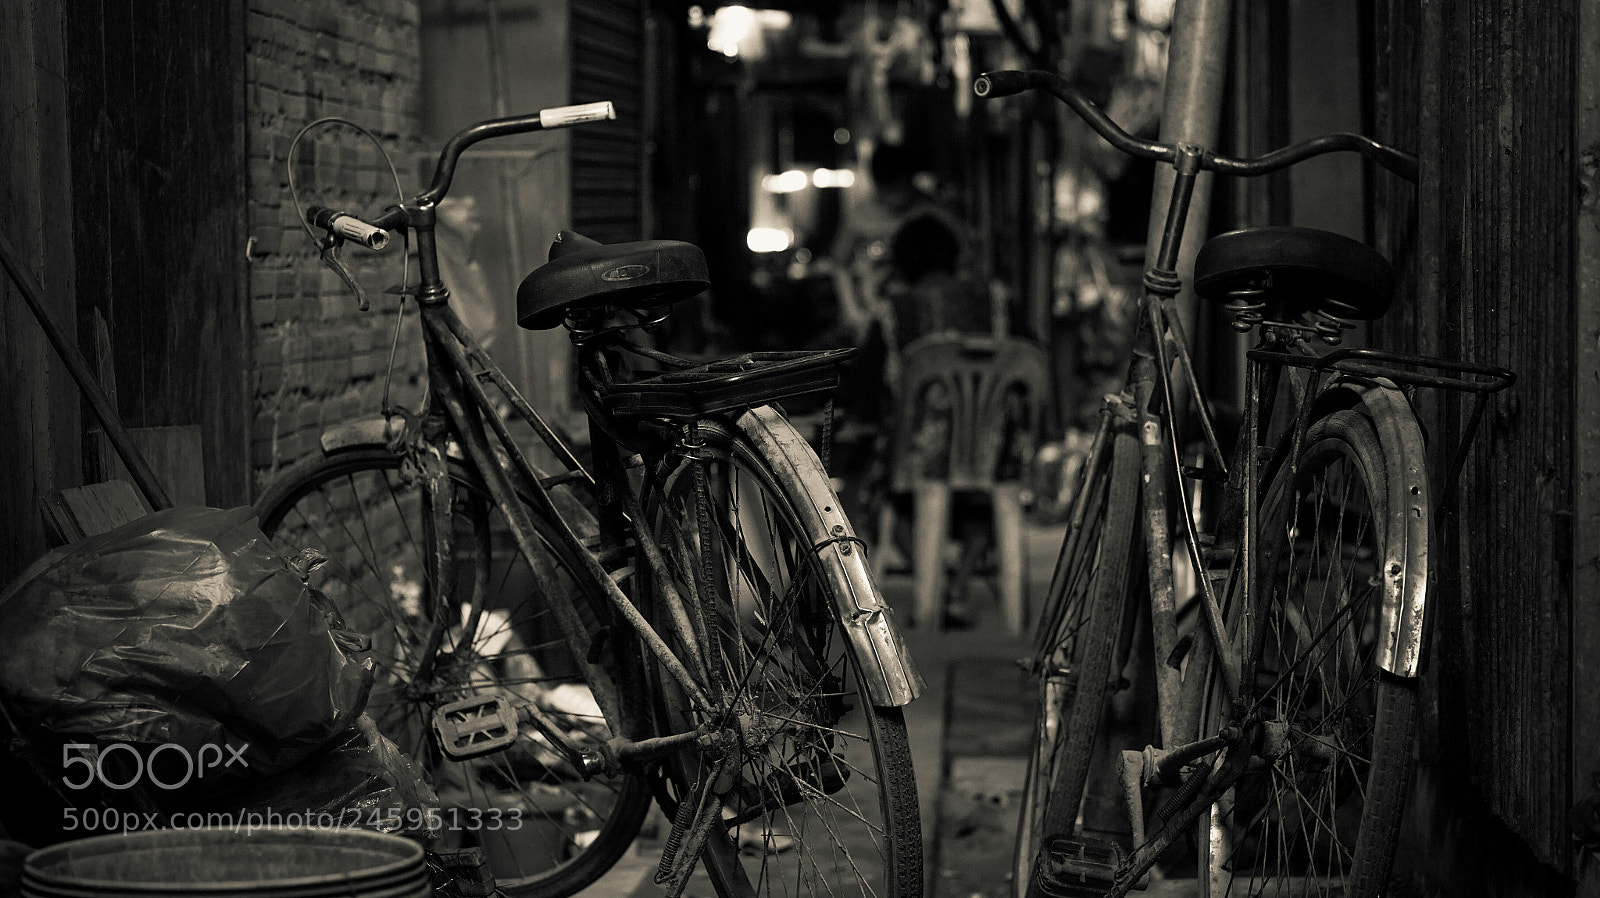 Sony a6000 sample photo. The old bicycles. photography